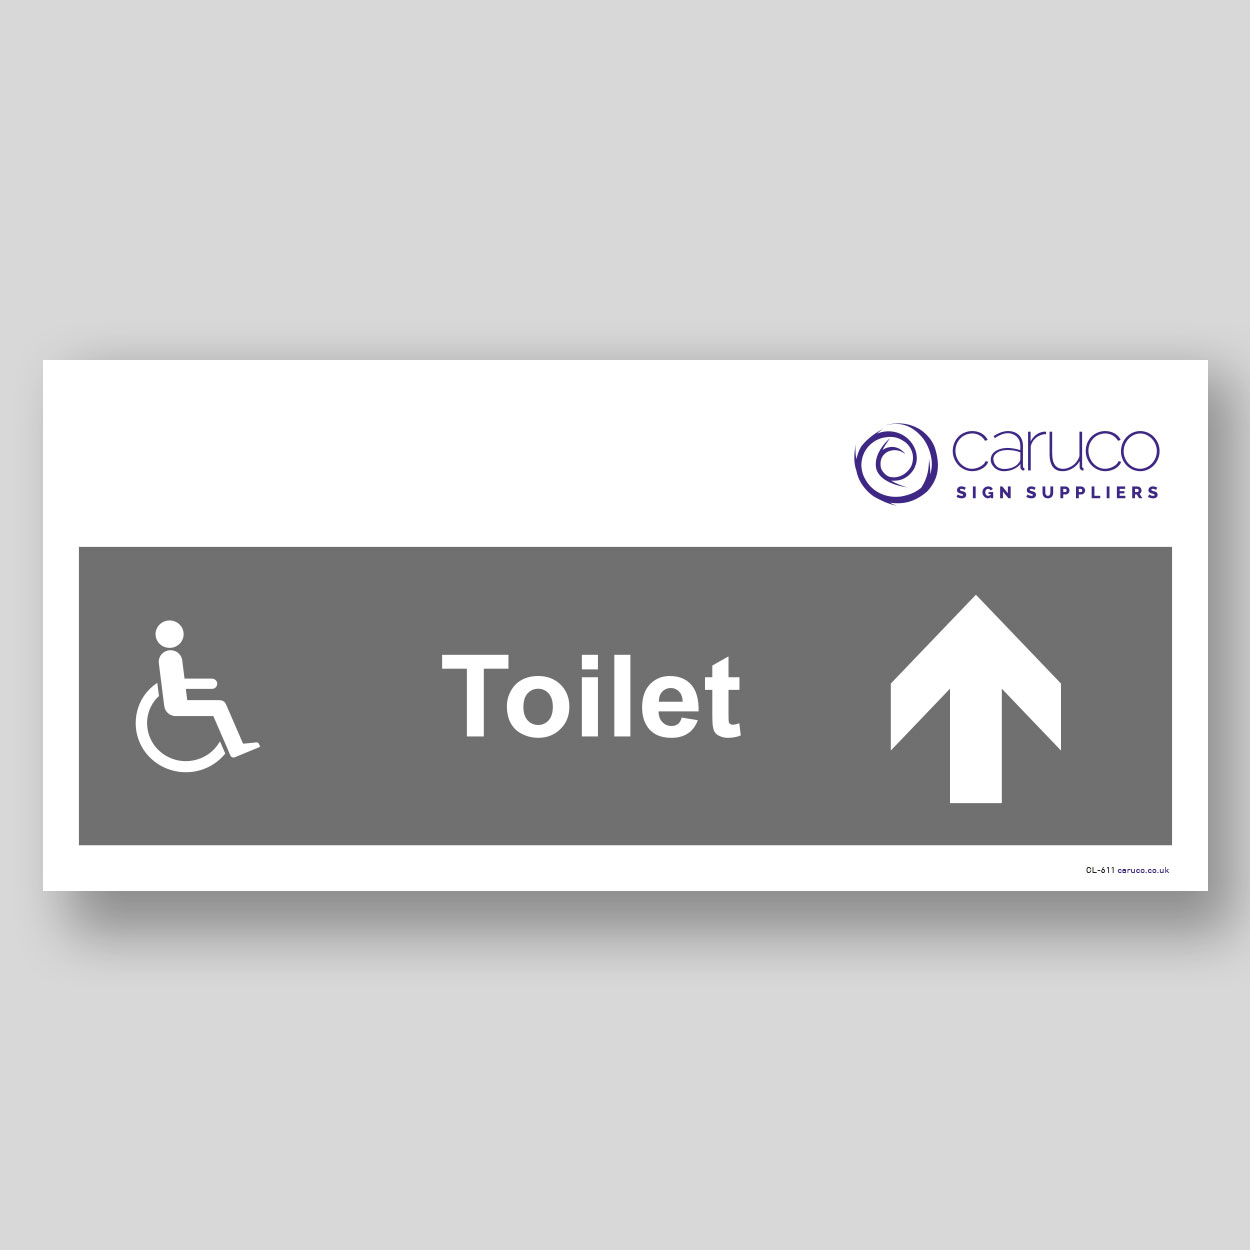 CL-611 Disabled toilet with forward arrow